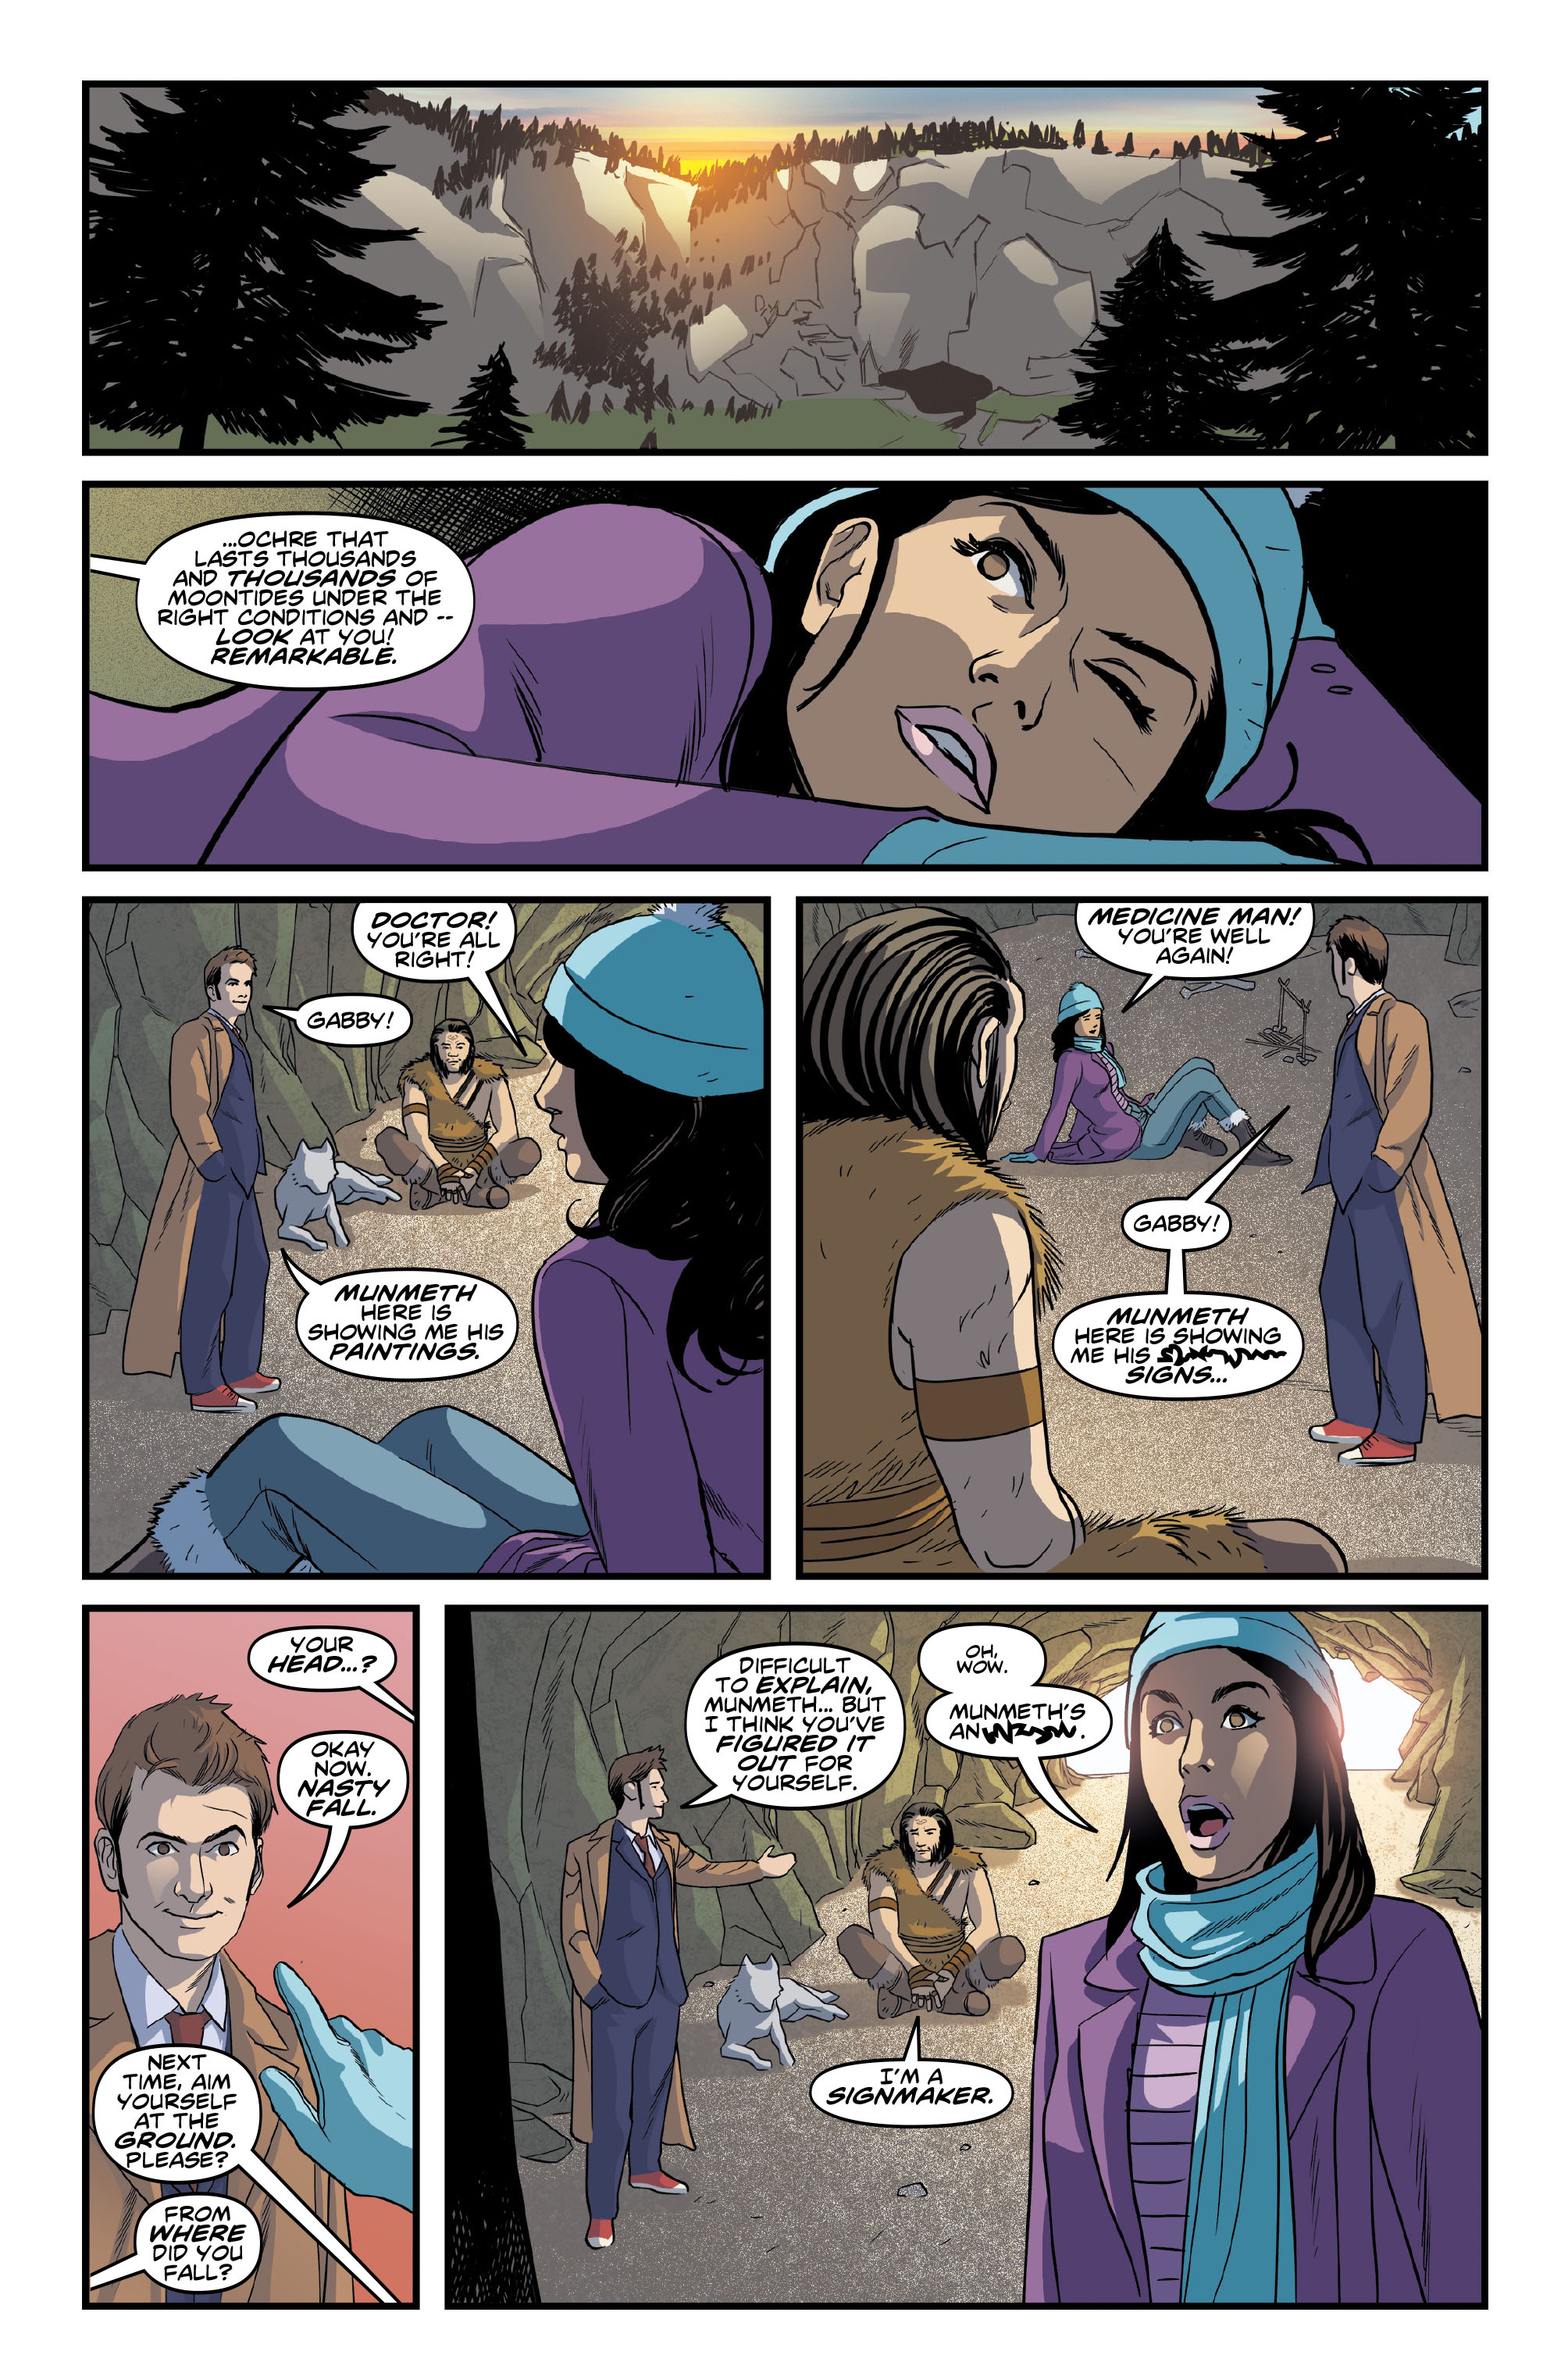 Doctor Who: The Tenth Doctor: Year Two #4 Preview Page